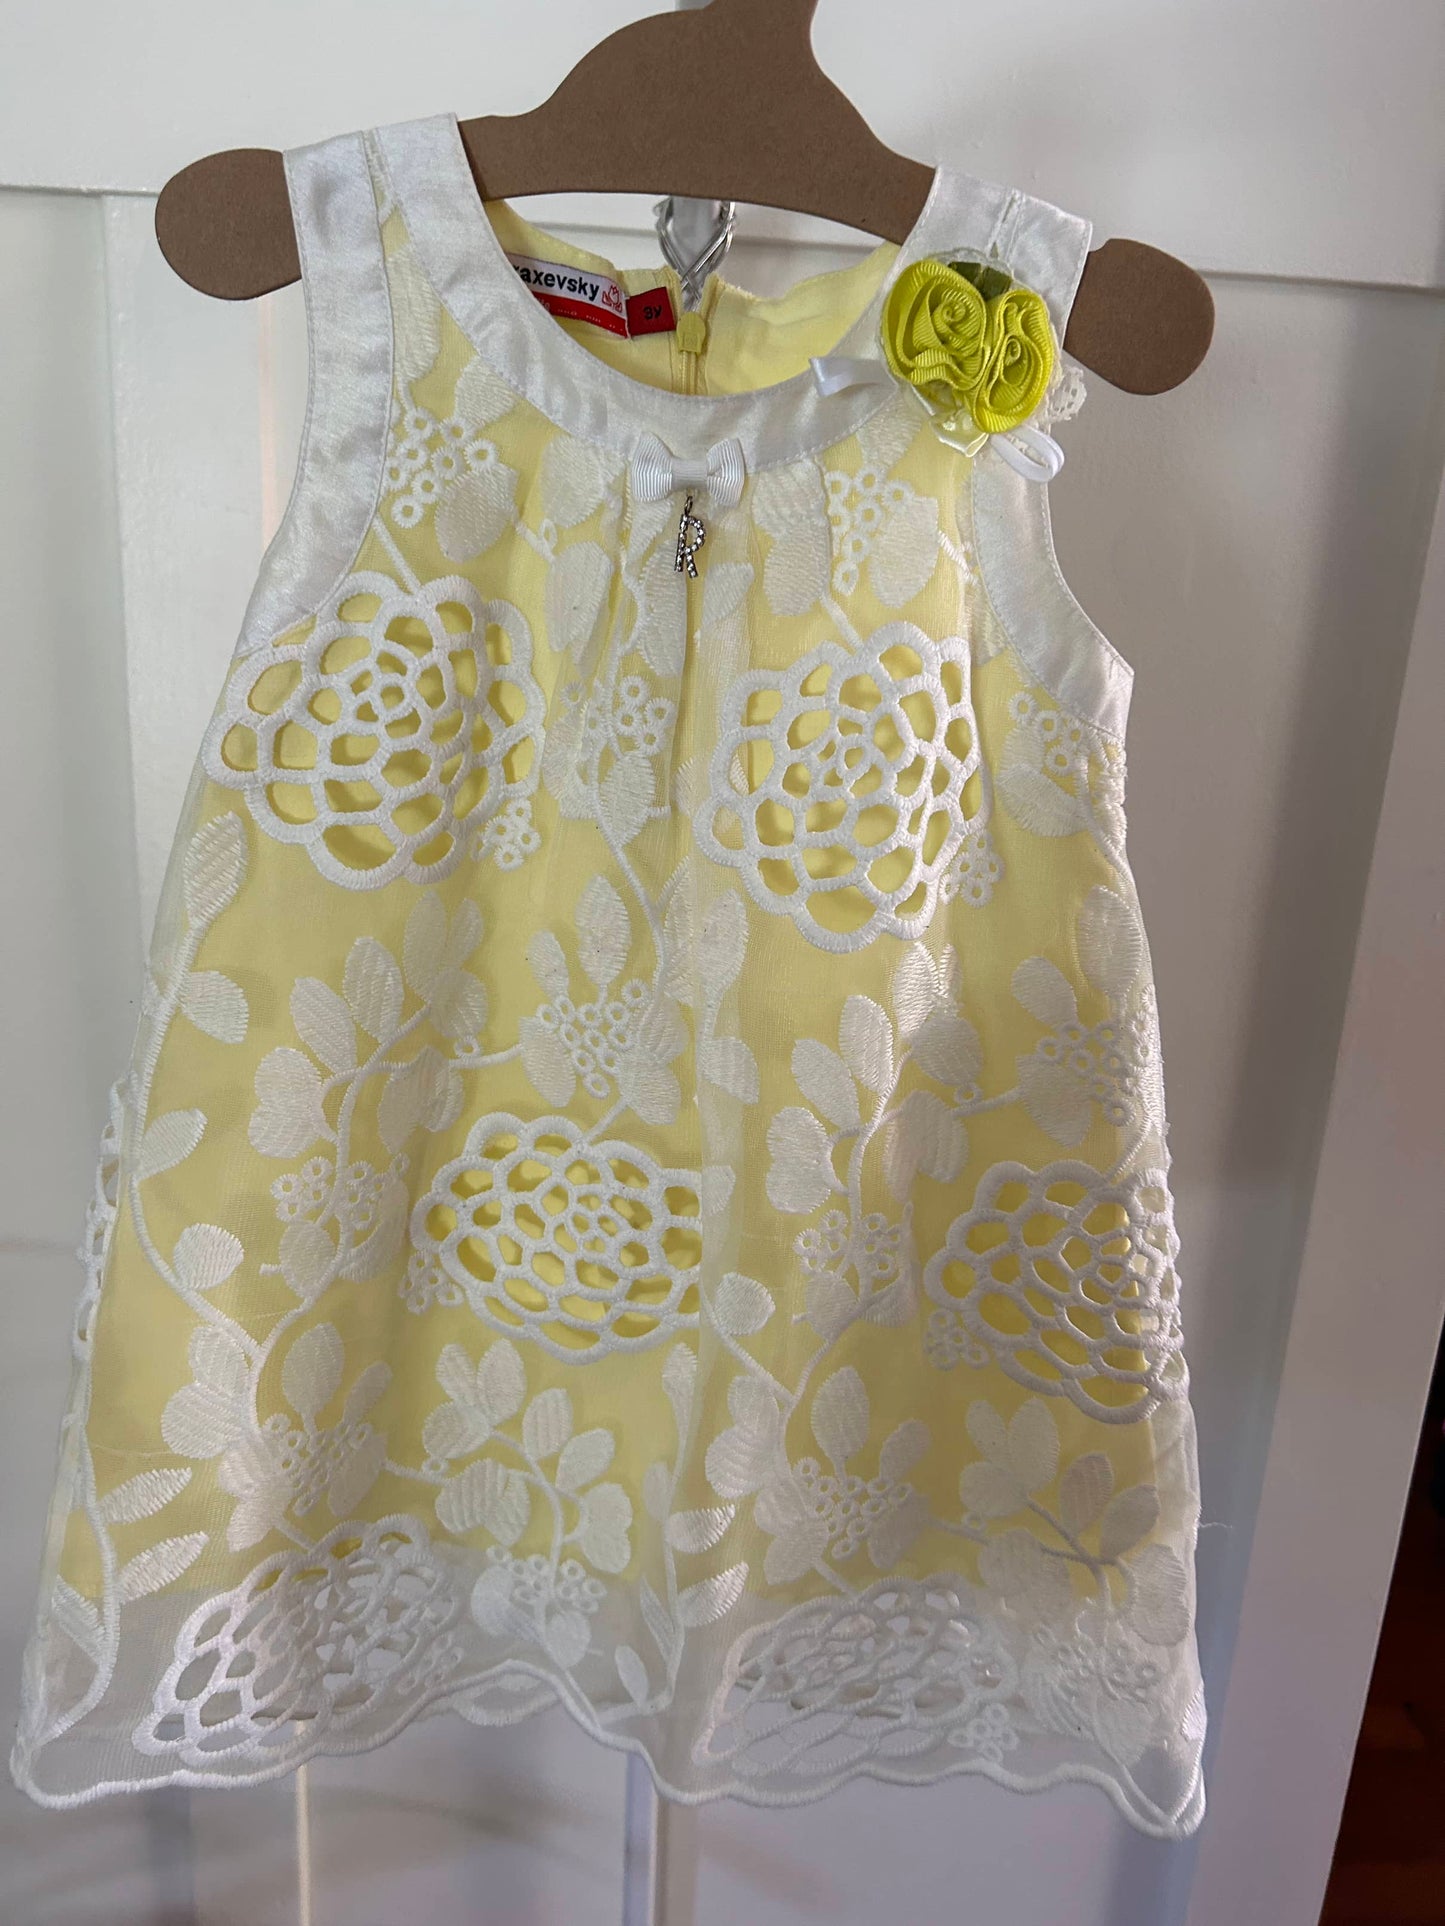 Soft Yellow Floral A-line Dress by Mini Raxevsky - 3t (Pre-Loved)